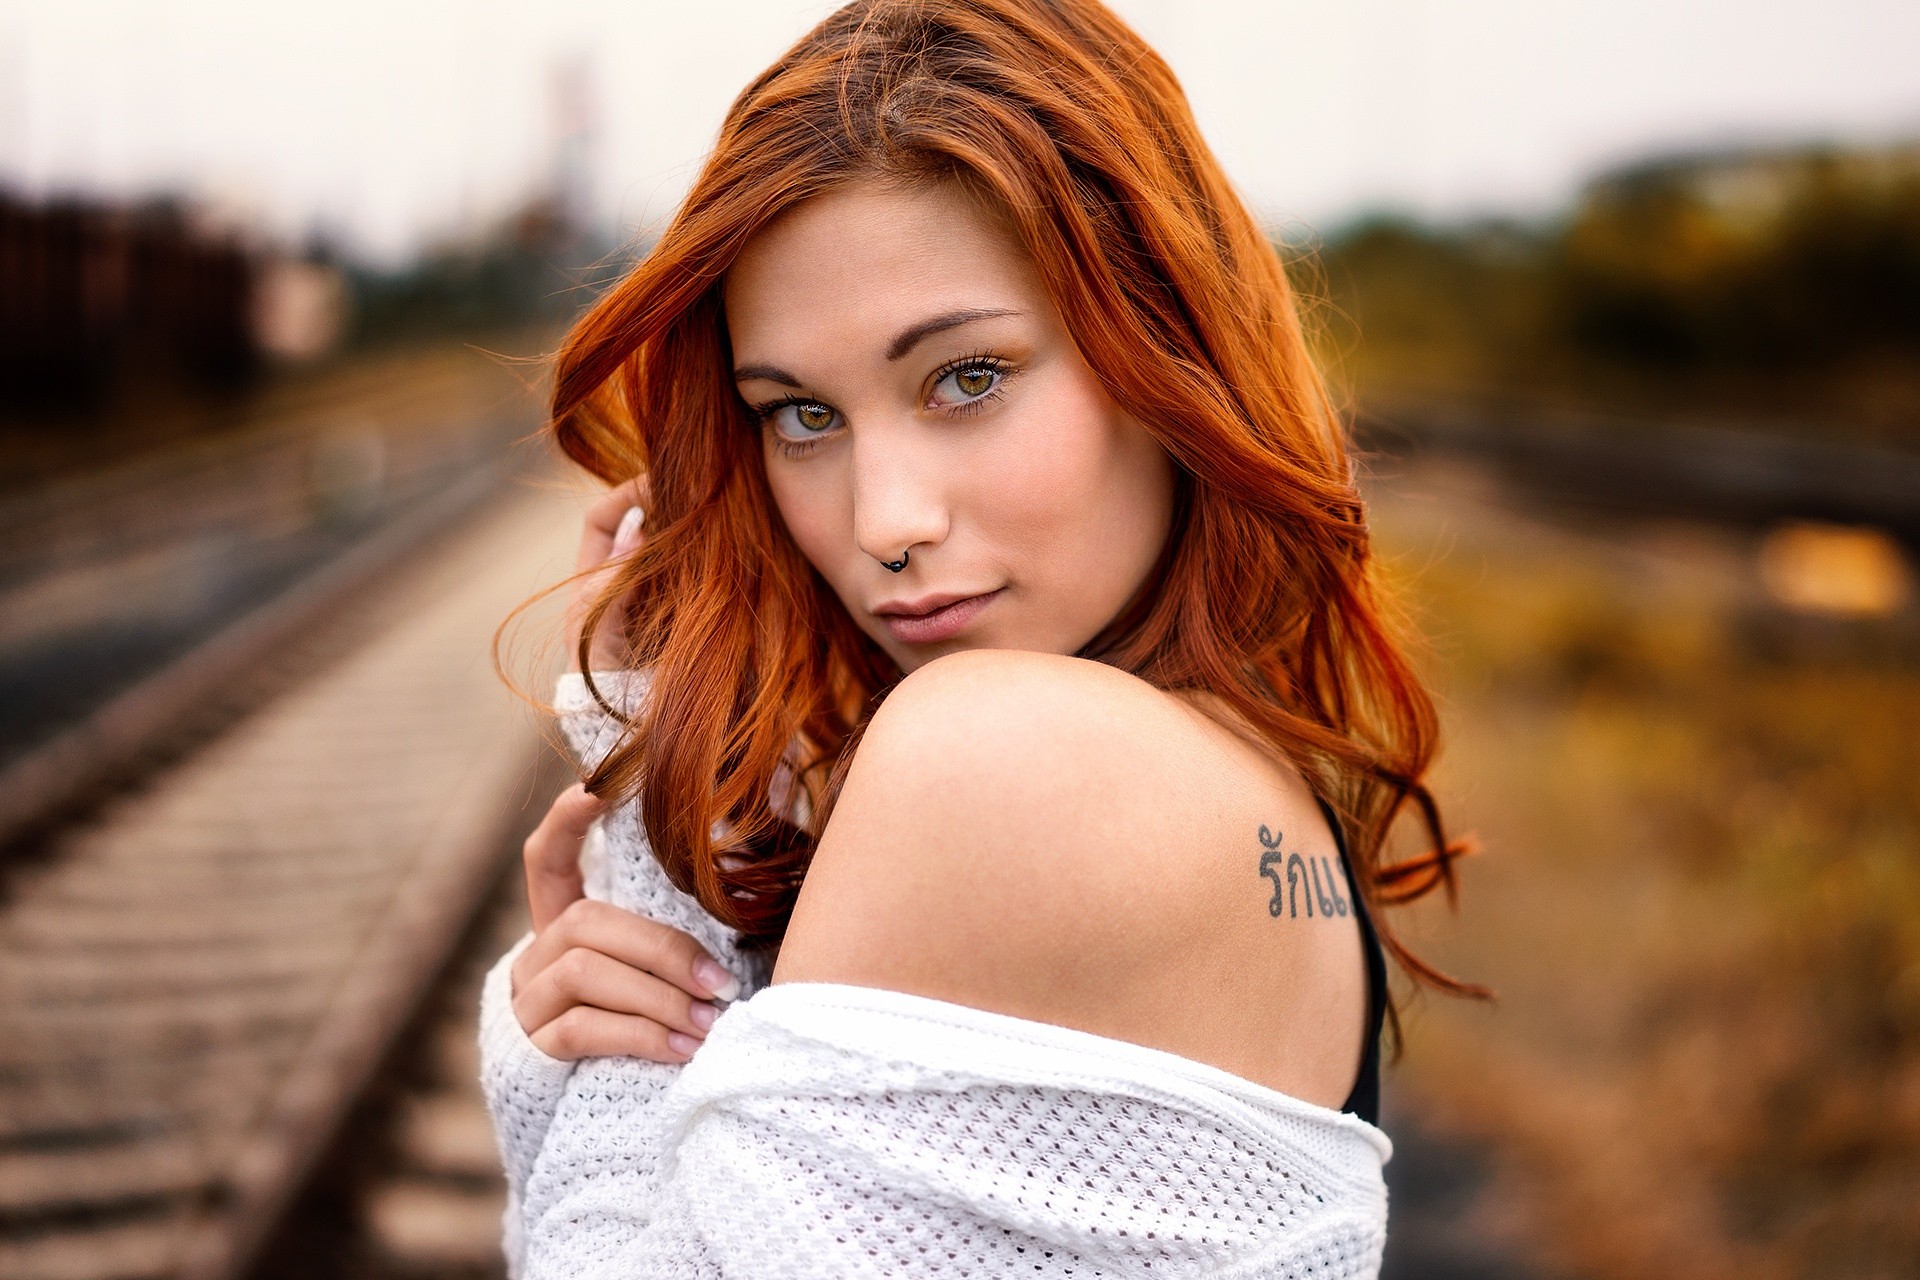 Women Model Redhead Yellow Eyes Tattoo White Clothing Railway Looking At Viewer Pierced Nose